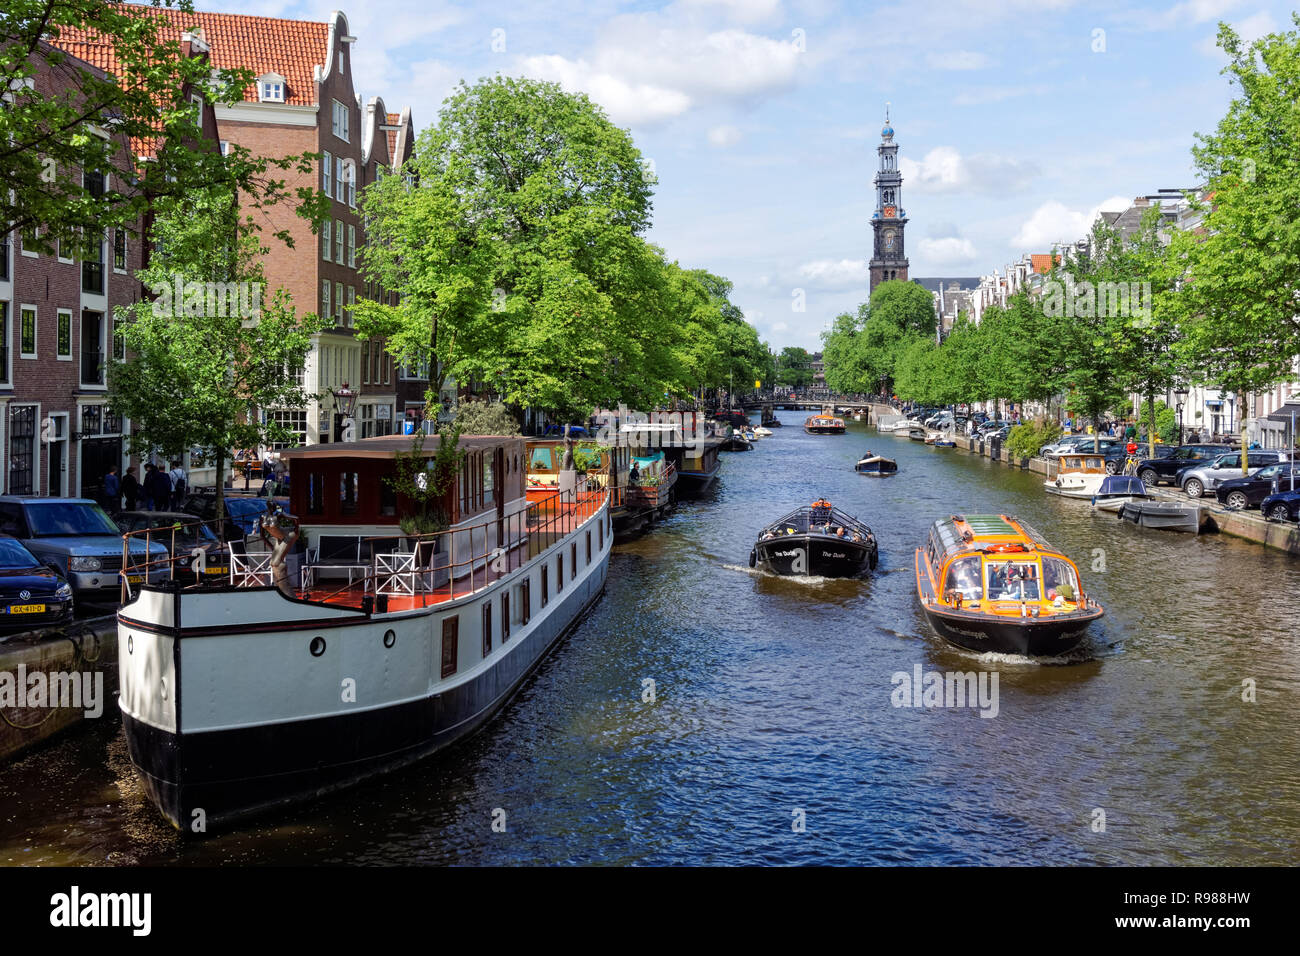 Tourist cruise boats on Prinsengracht canal in Amsterdam, Netherlands Stock Photo